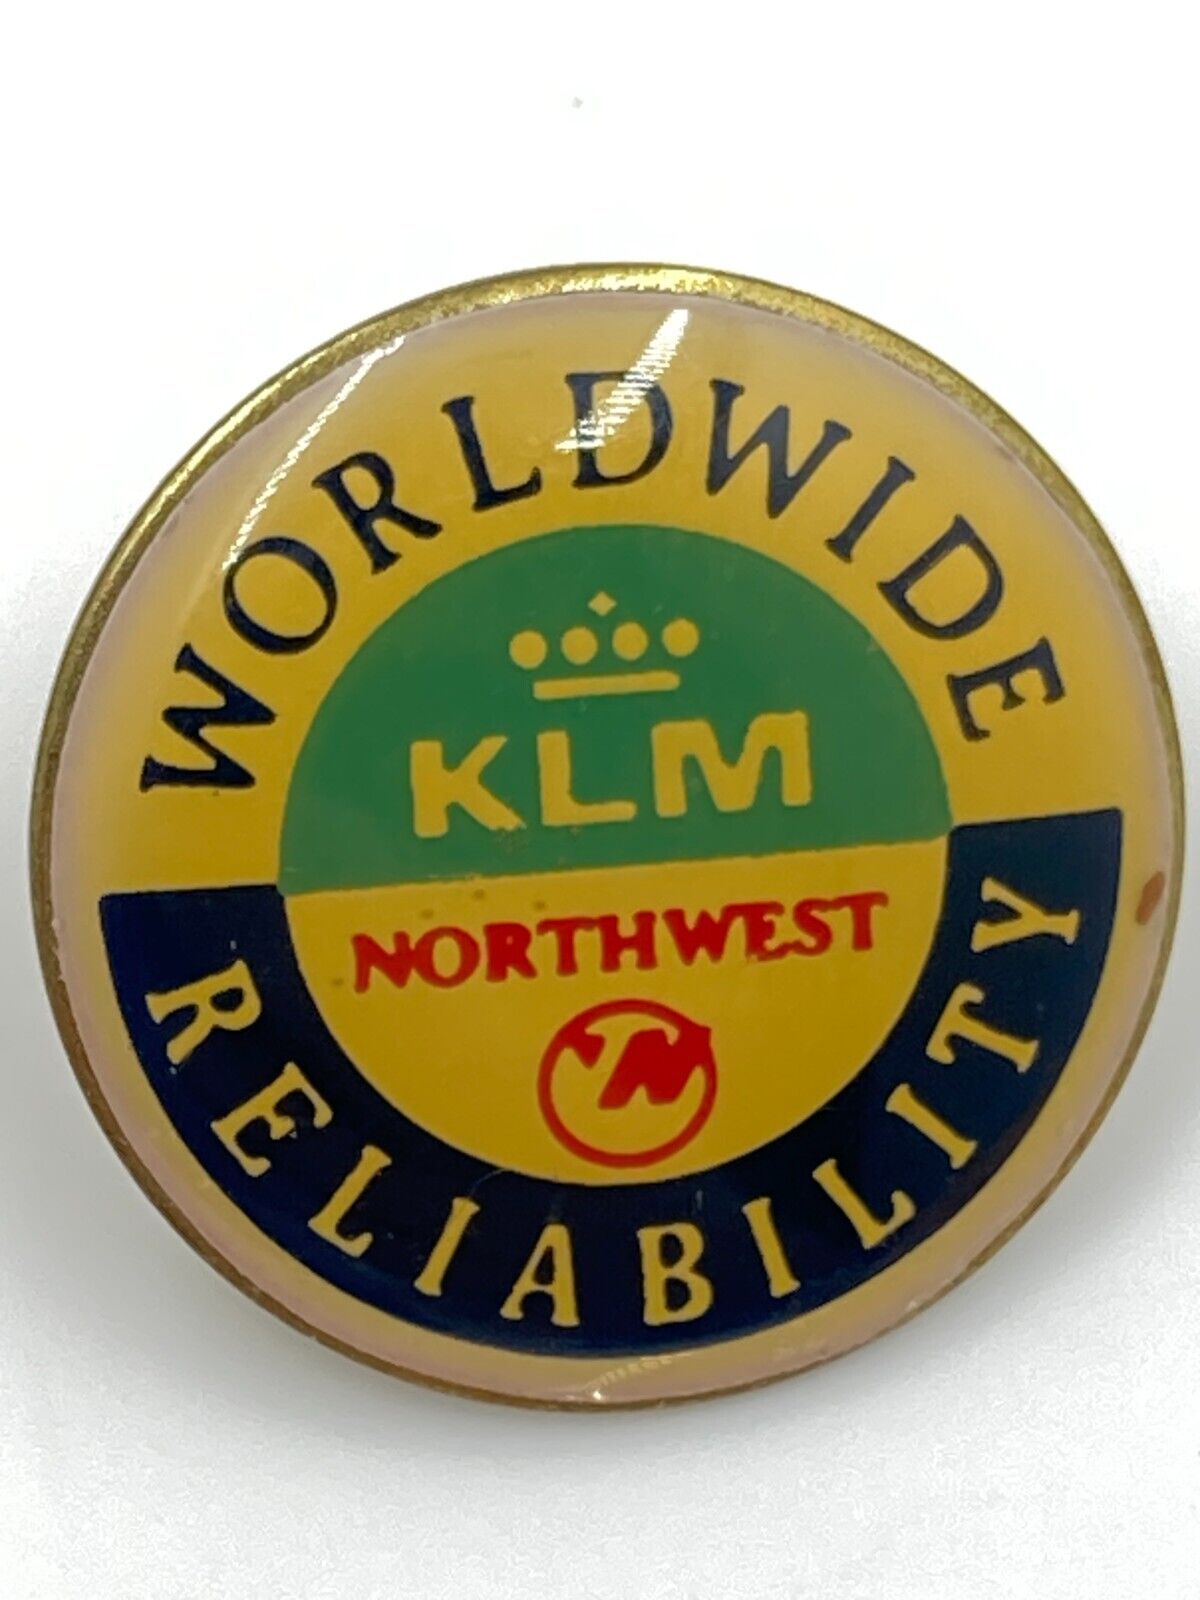 Northwest Klm Airlines Royal Dutch Worldwide Reliability Pin Button Union Made